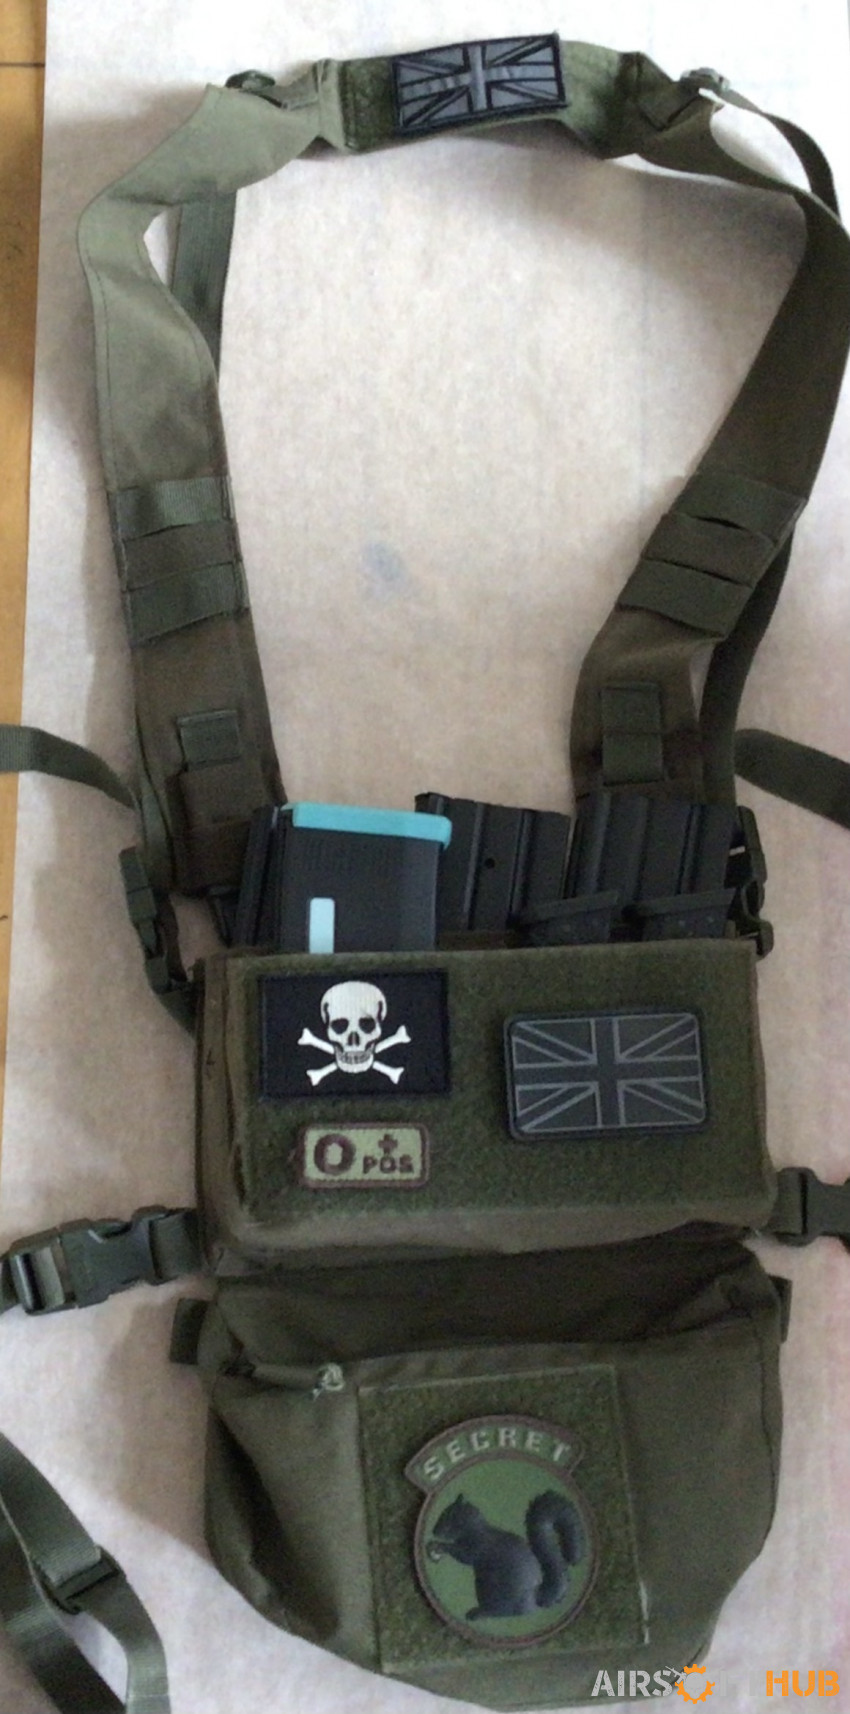 Viper VX chest rig and pouch - Used airsoft equipment